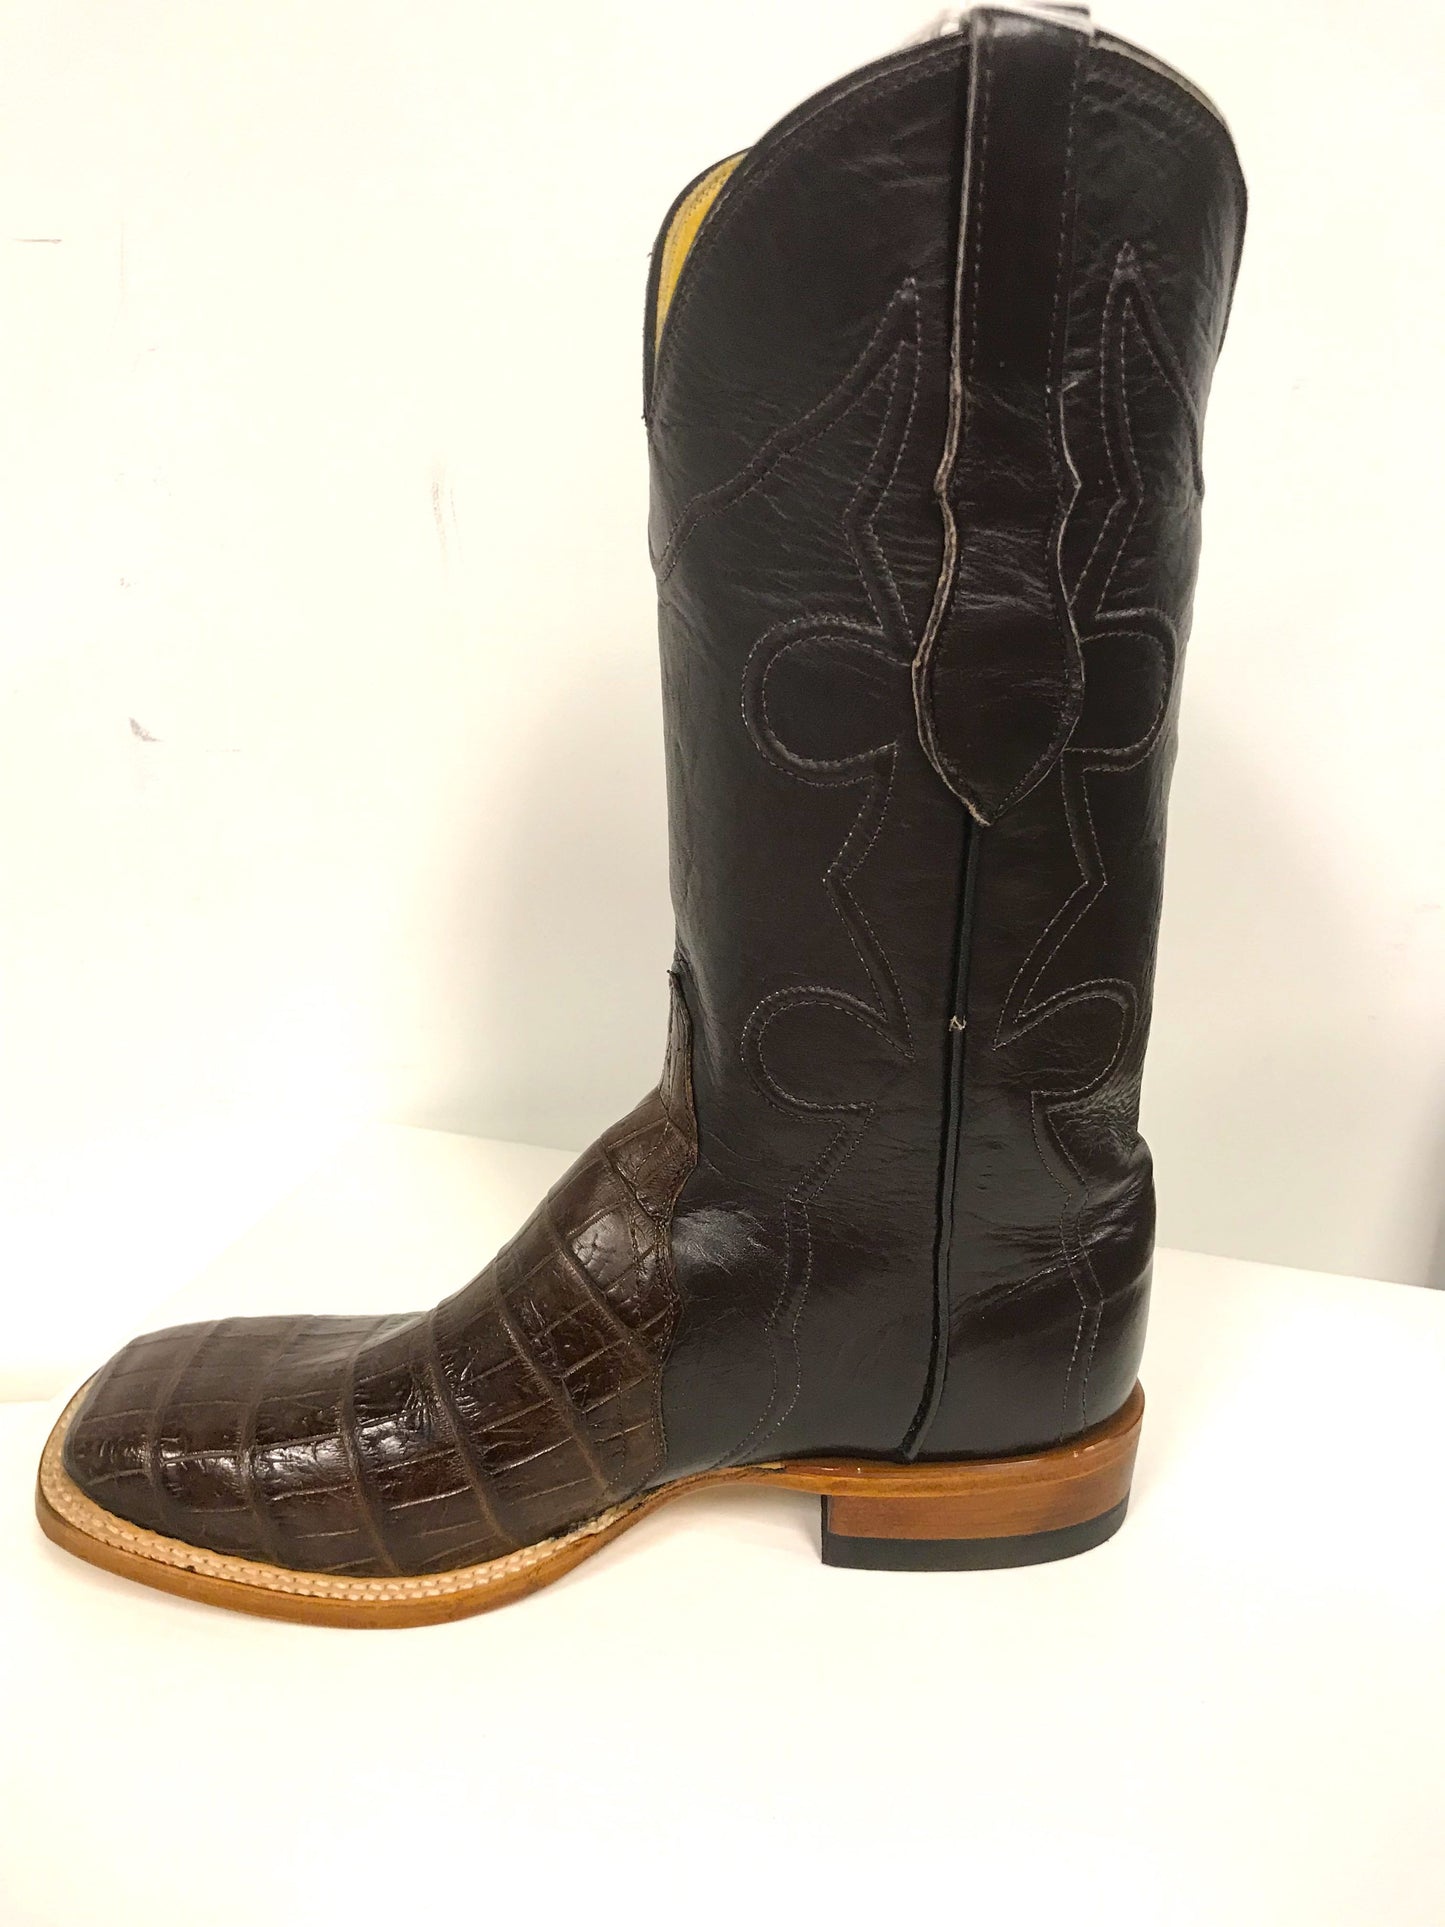 Q8708 Cowtown Chocolate Smooth Gator Square Toe